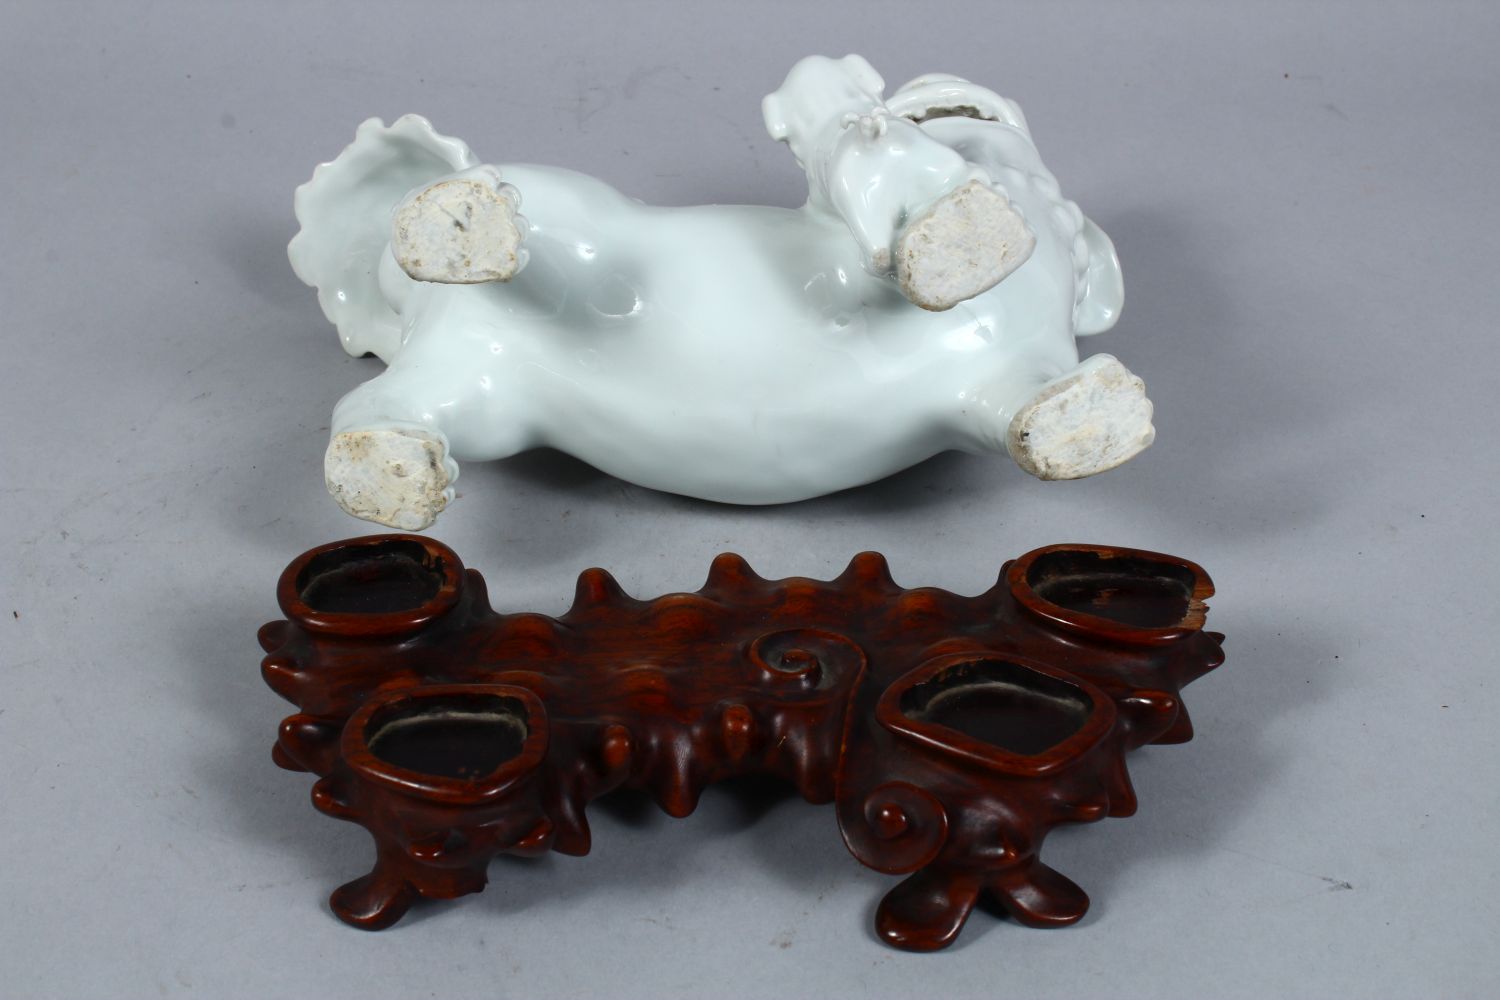 A GOOD 19TH / 20TH CENTURY CHINESE BLANC DE CHINE PORCELAIN FIGURE OF A LION DOG AND PUP, the dog - Image 4 of 4